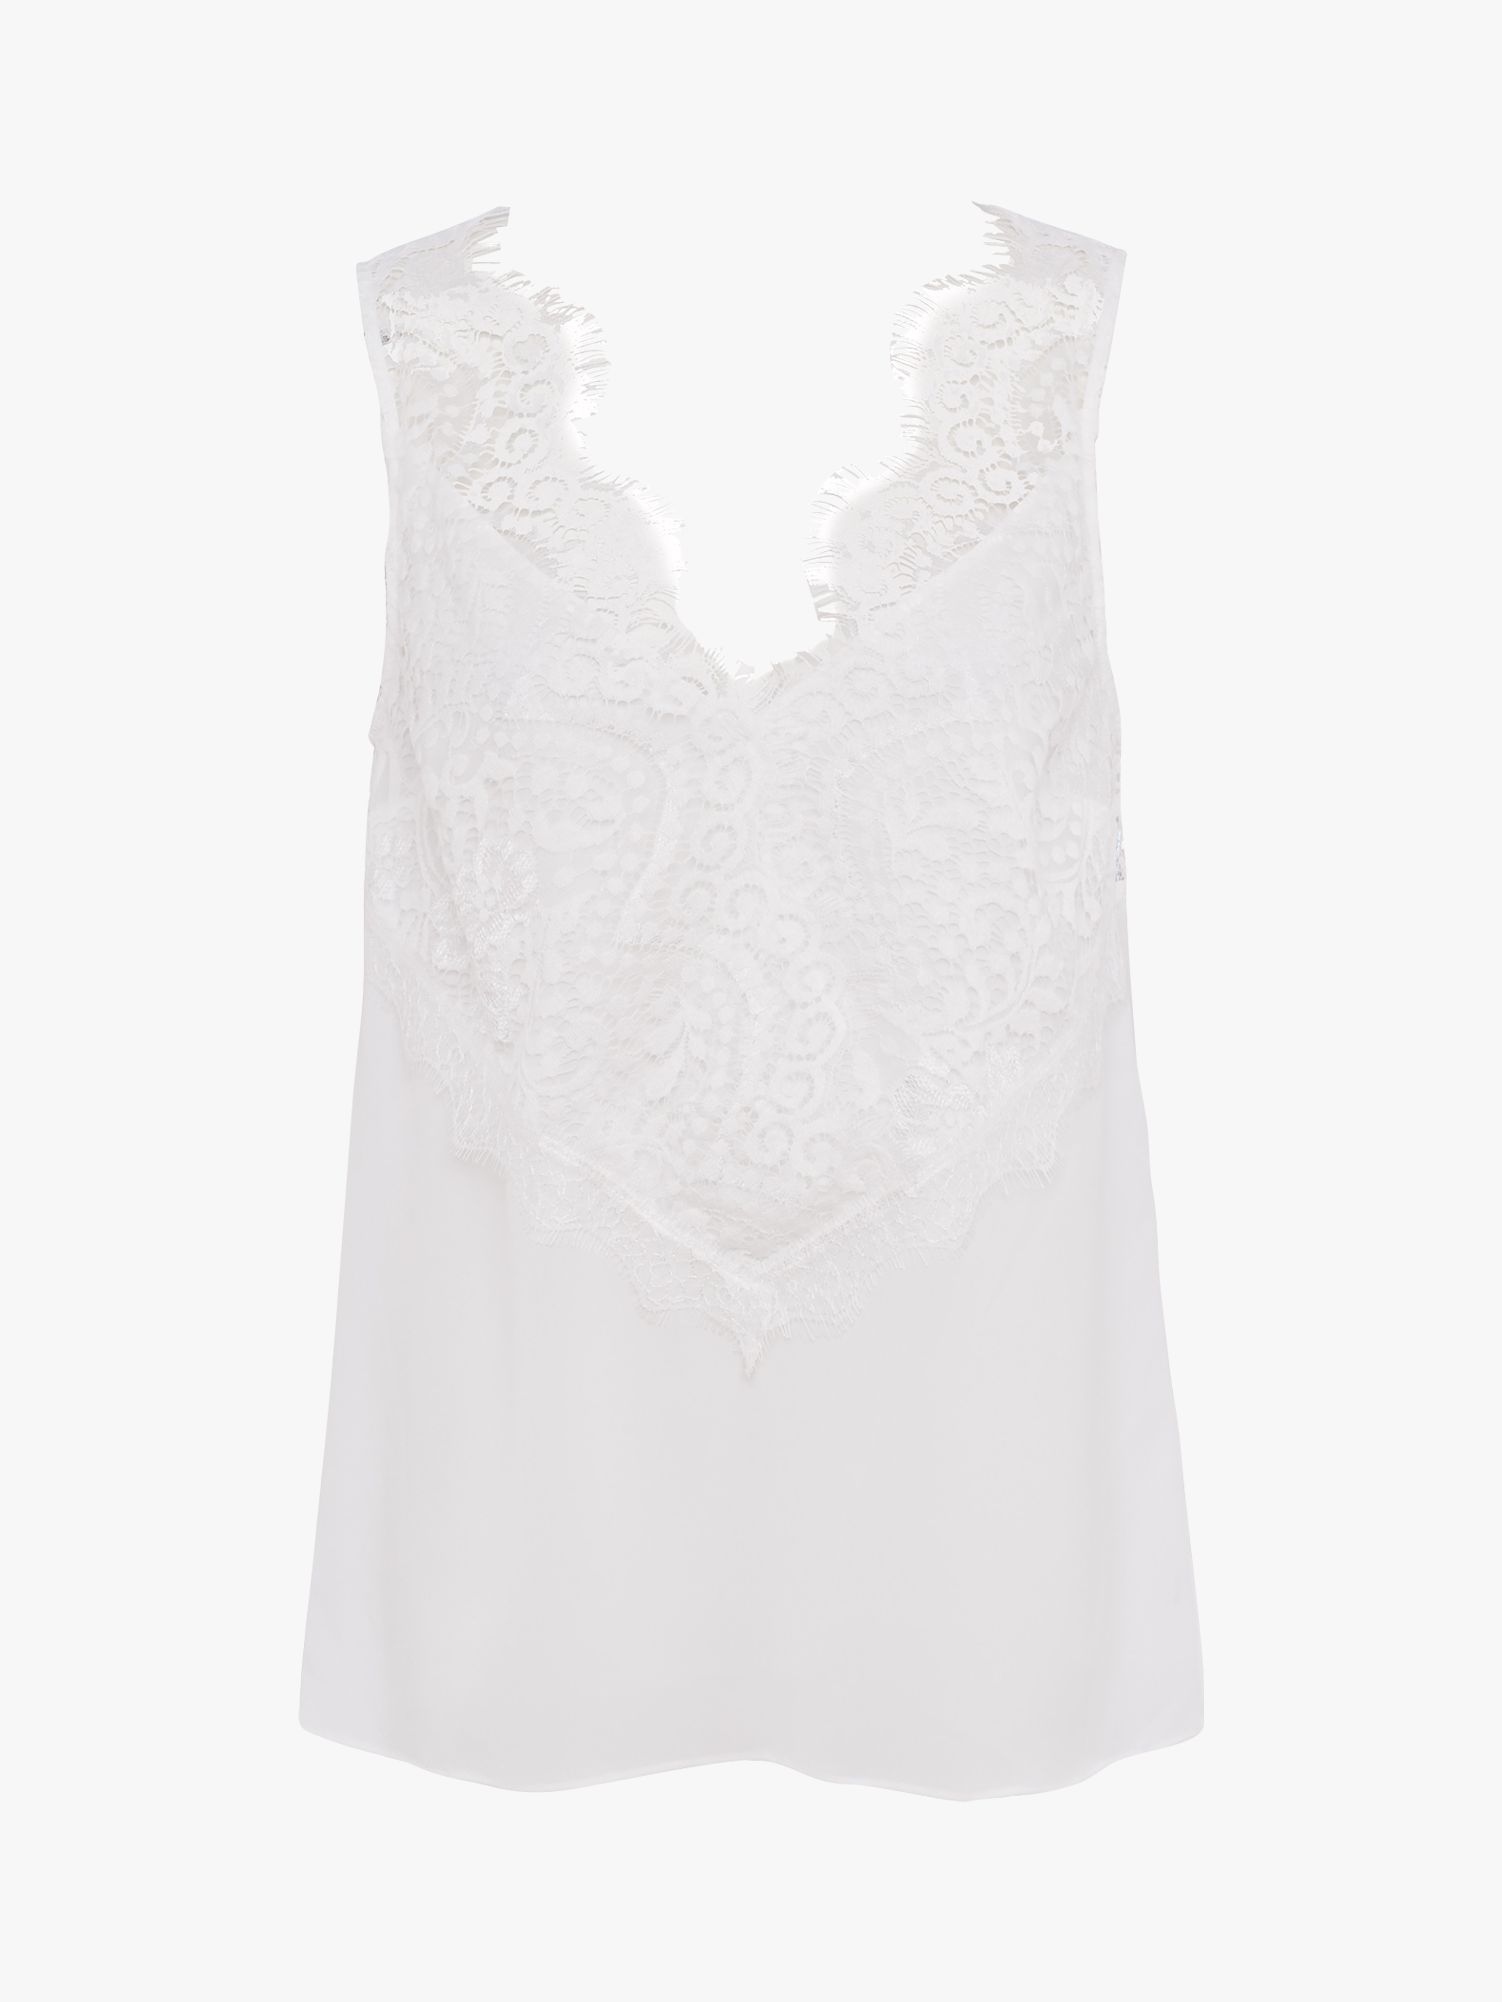 French Connection Light Woven Lace Top